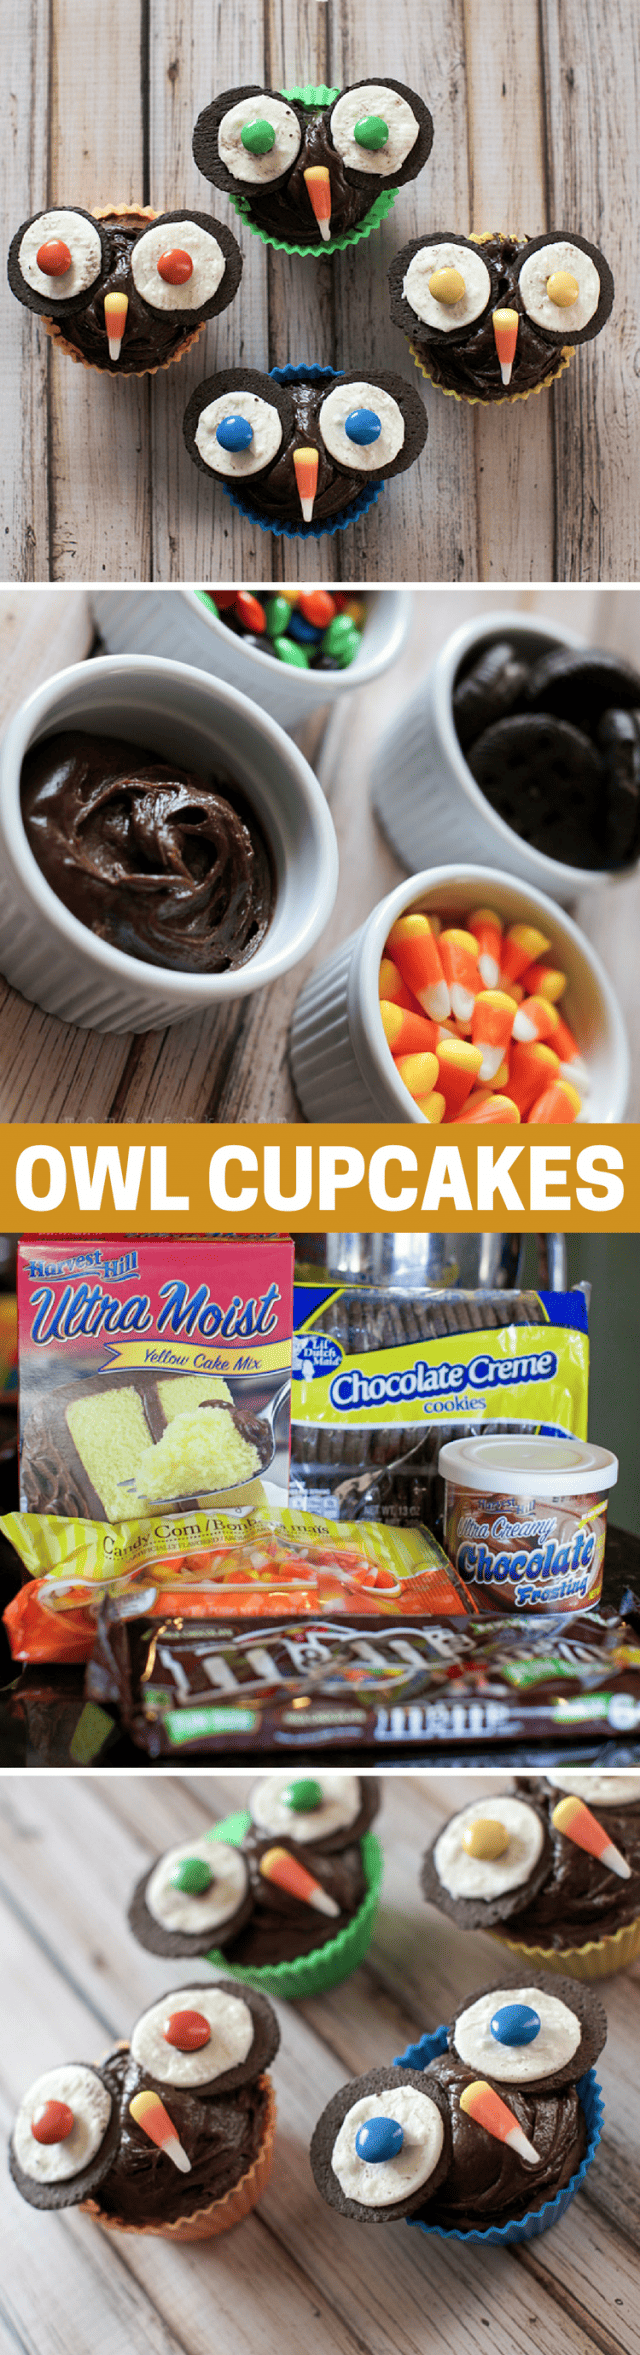 How to a Make Owl Cupcake Recipe for Fall and Halloween!